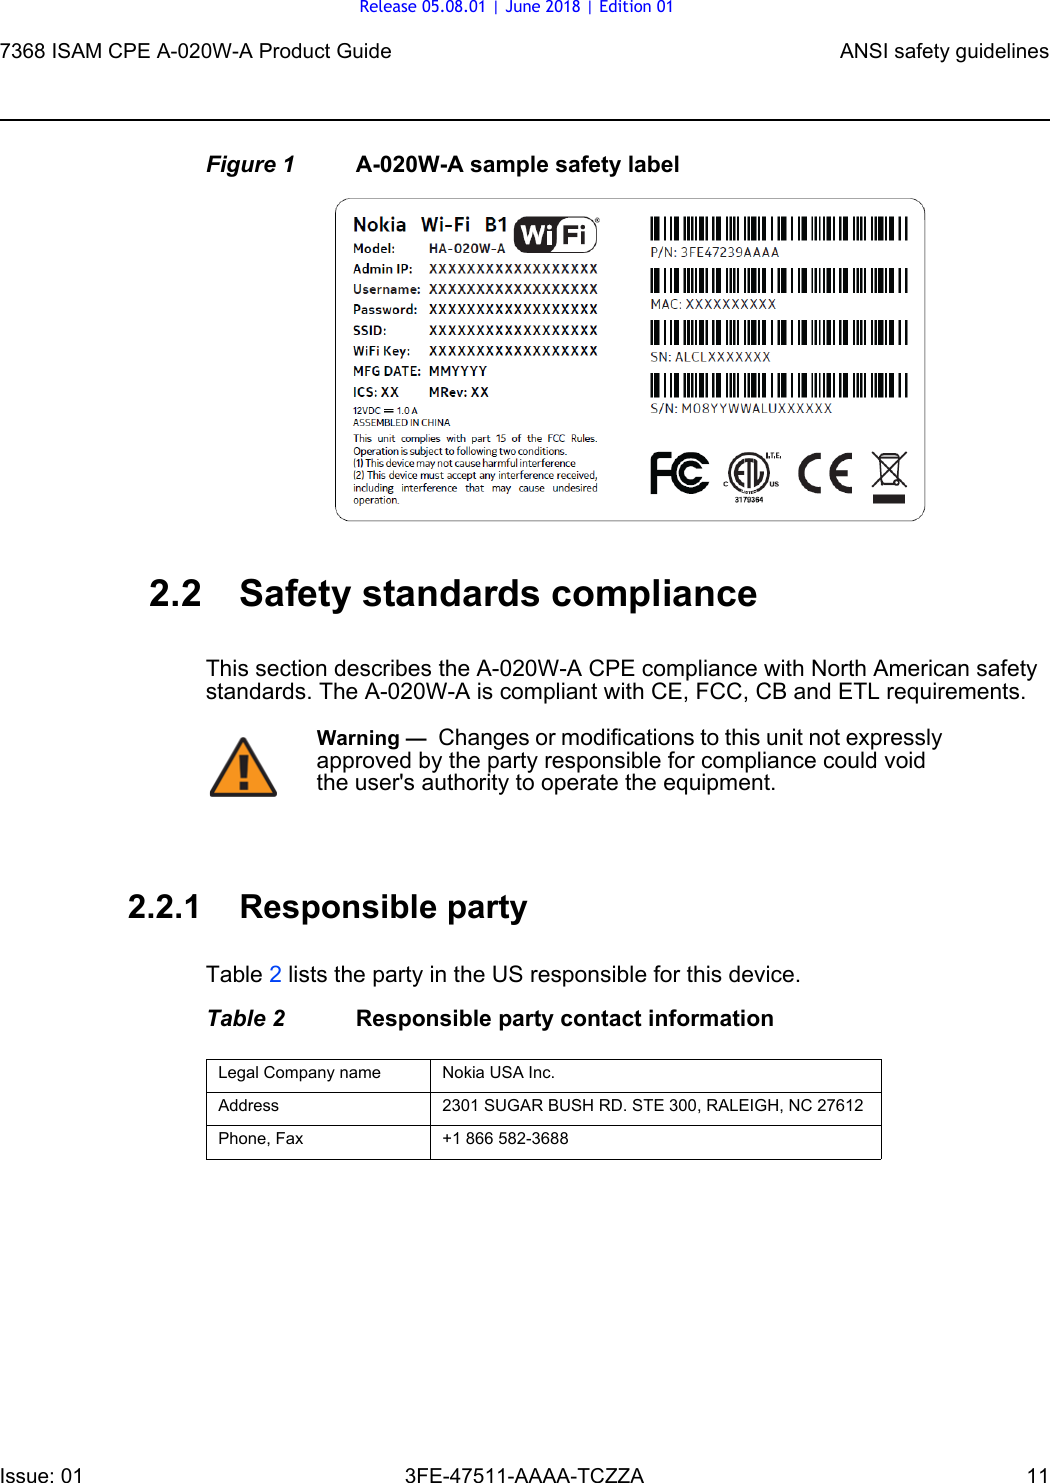 7368 ISAM CPE A-020W-A Product Guide ANSI safety guidelinesIssue: 01 3FE-47511-AAAA-TCZZA 11 Figure 1 A-020W-A sample safety label2.2 Safety standards complianceThis section describes the A-020W-A CPE compliance with North American safety standards. The A-020W-A is compliant with CE, FCC, CB and ETL requirements.2.2.1 Responsible partyTable 2 lists the party in the US responsible for this device.Table 2 Responsible party contact informationWarning —  Changes or modifications to this unit not expressly approved by the party responsible for compliance could void the user&apos;s authority to operate the equipment.Legal Company name Nokia USA Inc.Address 2301 SUGAR BUSH RD. STE 300, RALEIGH, NC 27612Phone, Fax +1 866 582-3688Release 05.08.01 | June 2018 | Edition 01